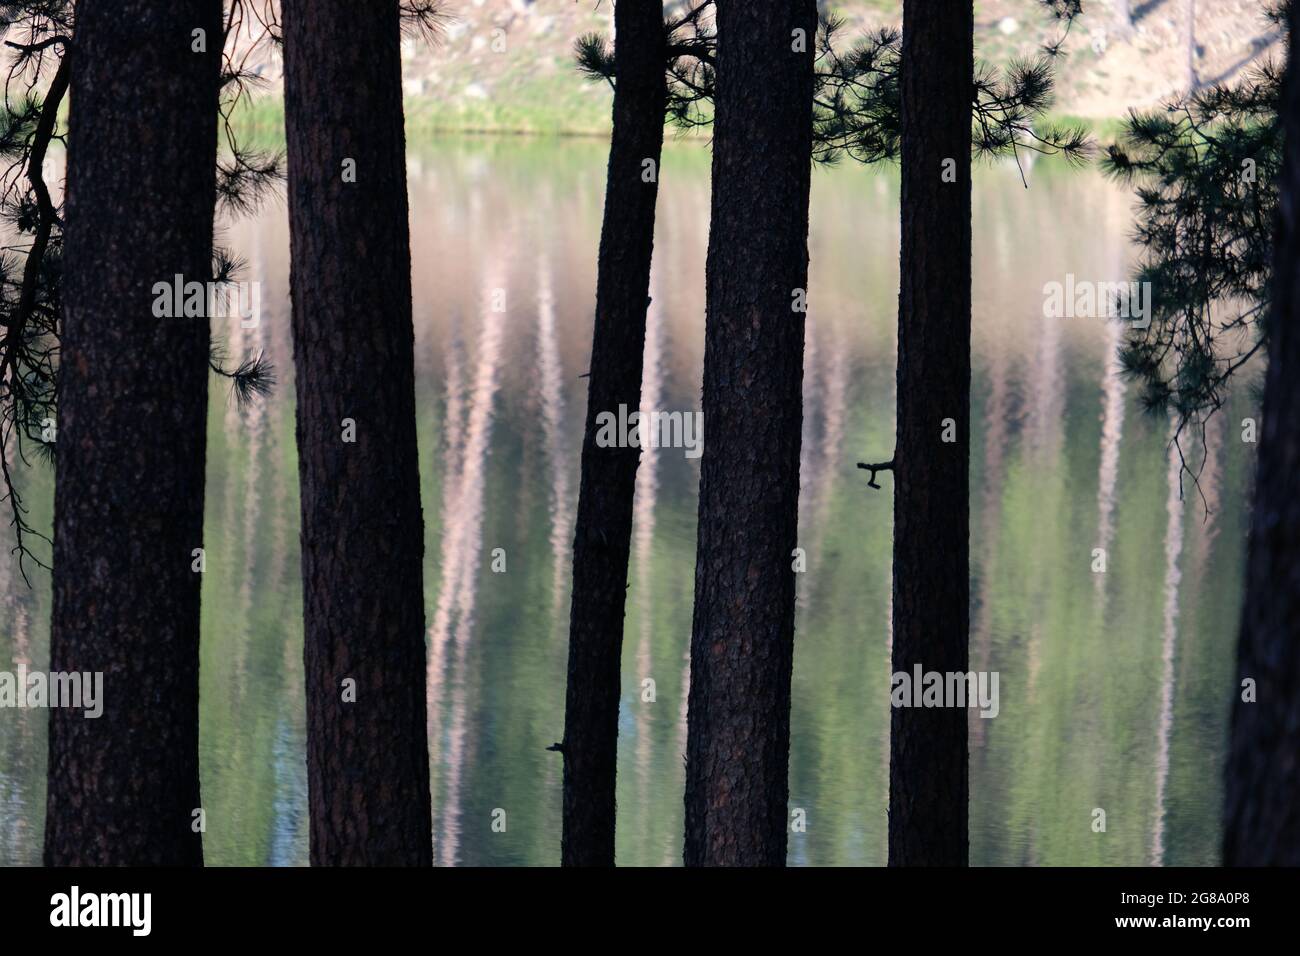 Trees silhouetted against water, Lake Center, Custer State Park, Black Hills, South Dakota, USA. Stock Photo